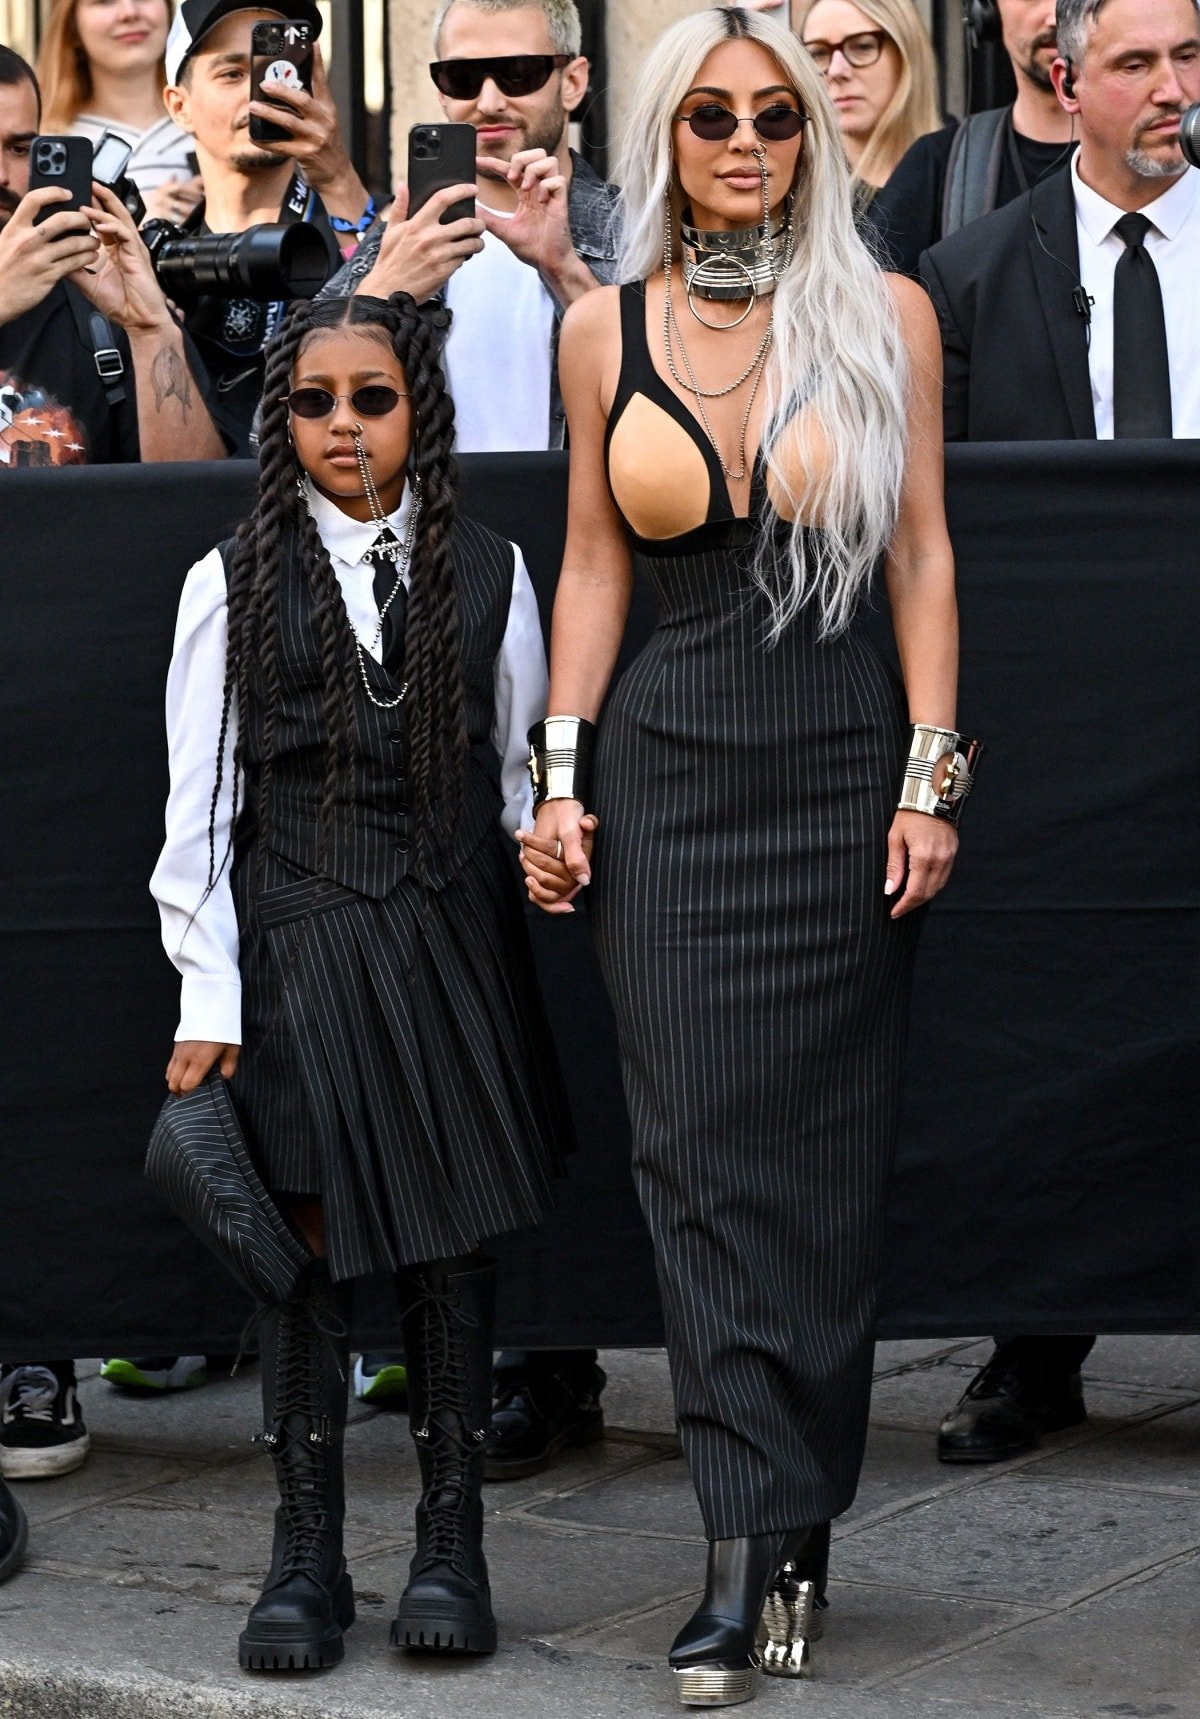 Kim Kardashian and daughter North West twinning in pinstriped outfits at the Jean Paul Gaultier x Olivier Rousteing show